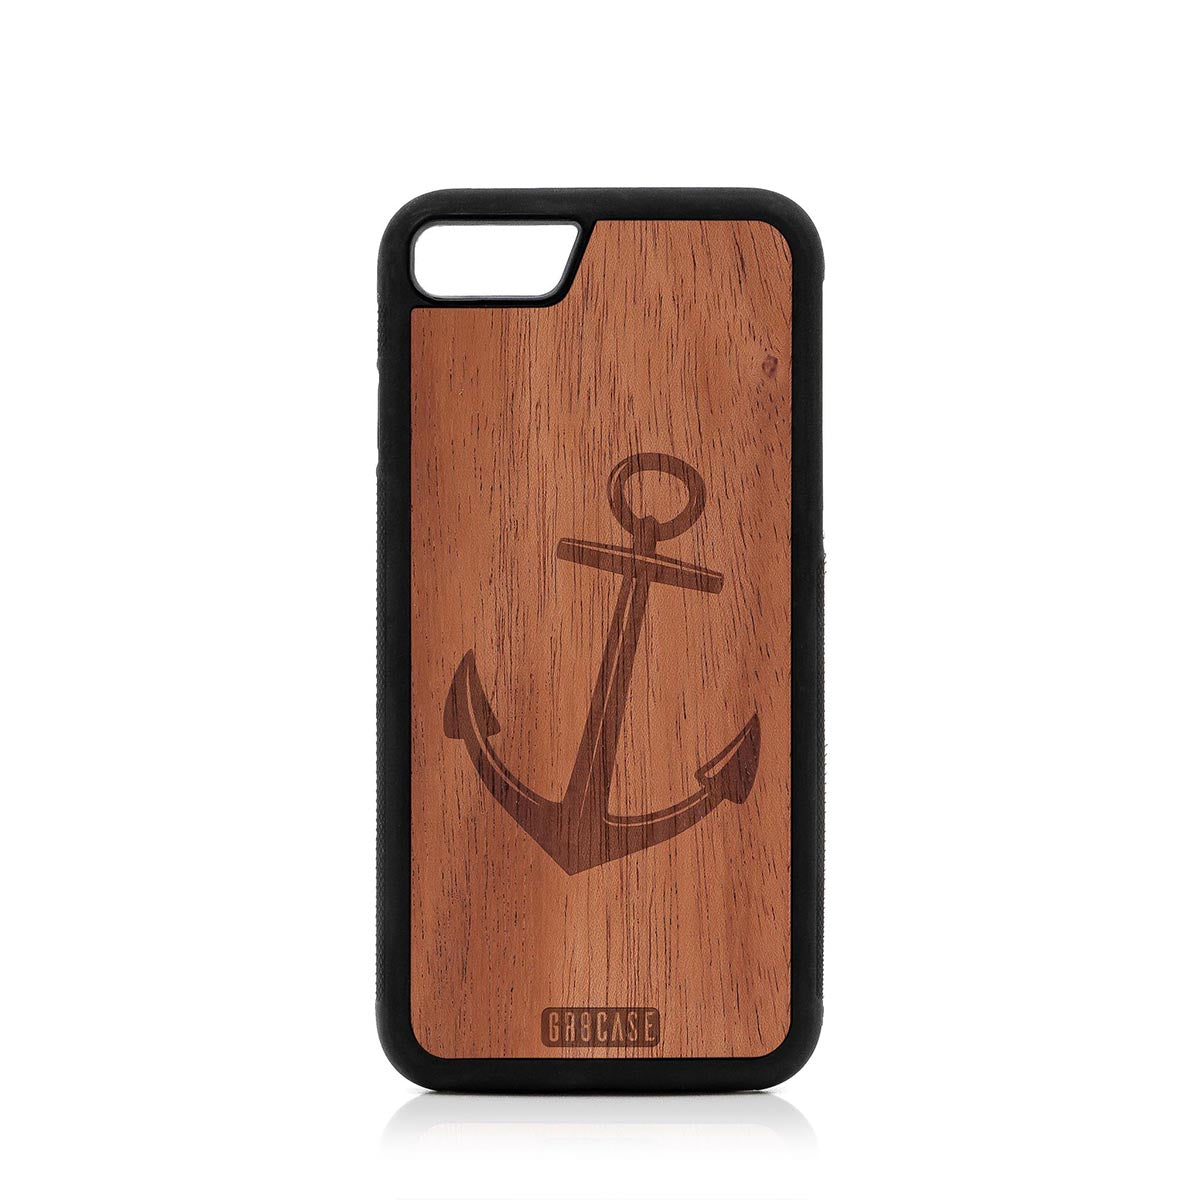 Anchor Design Wood Case For iPhone 7/8 by GR8CASE